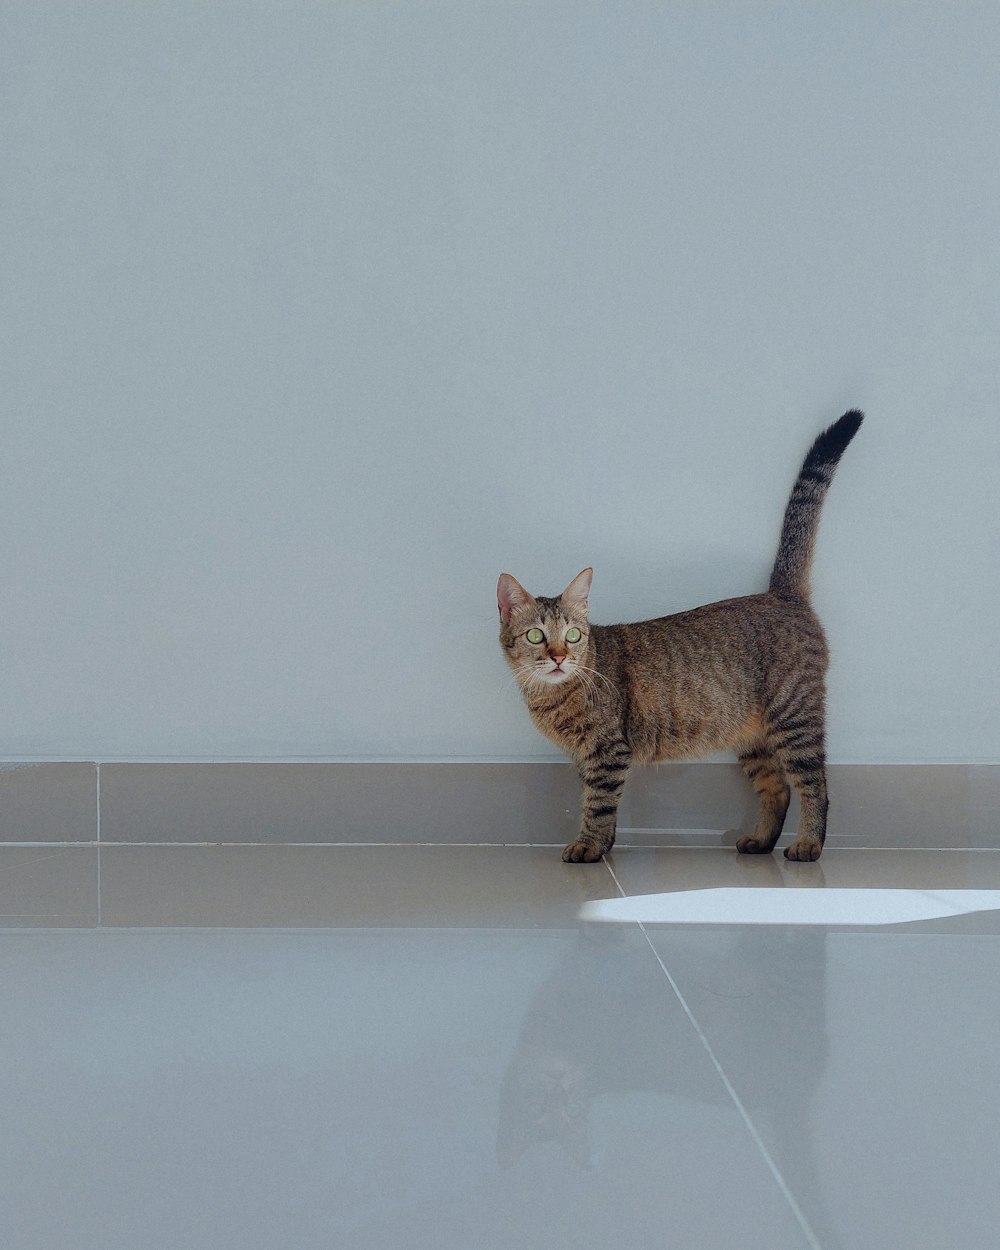 a cat standing on the floor in front of a white wall